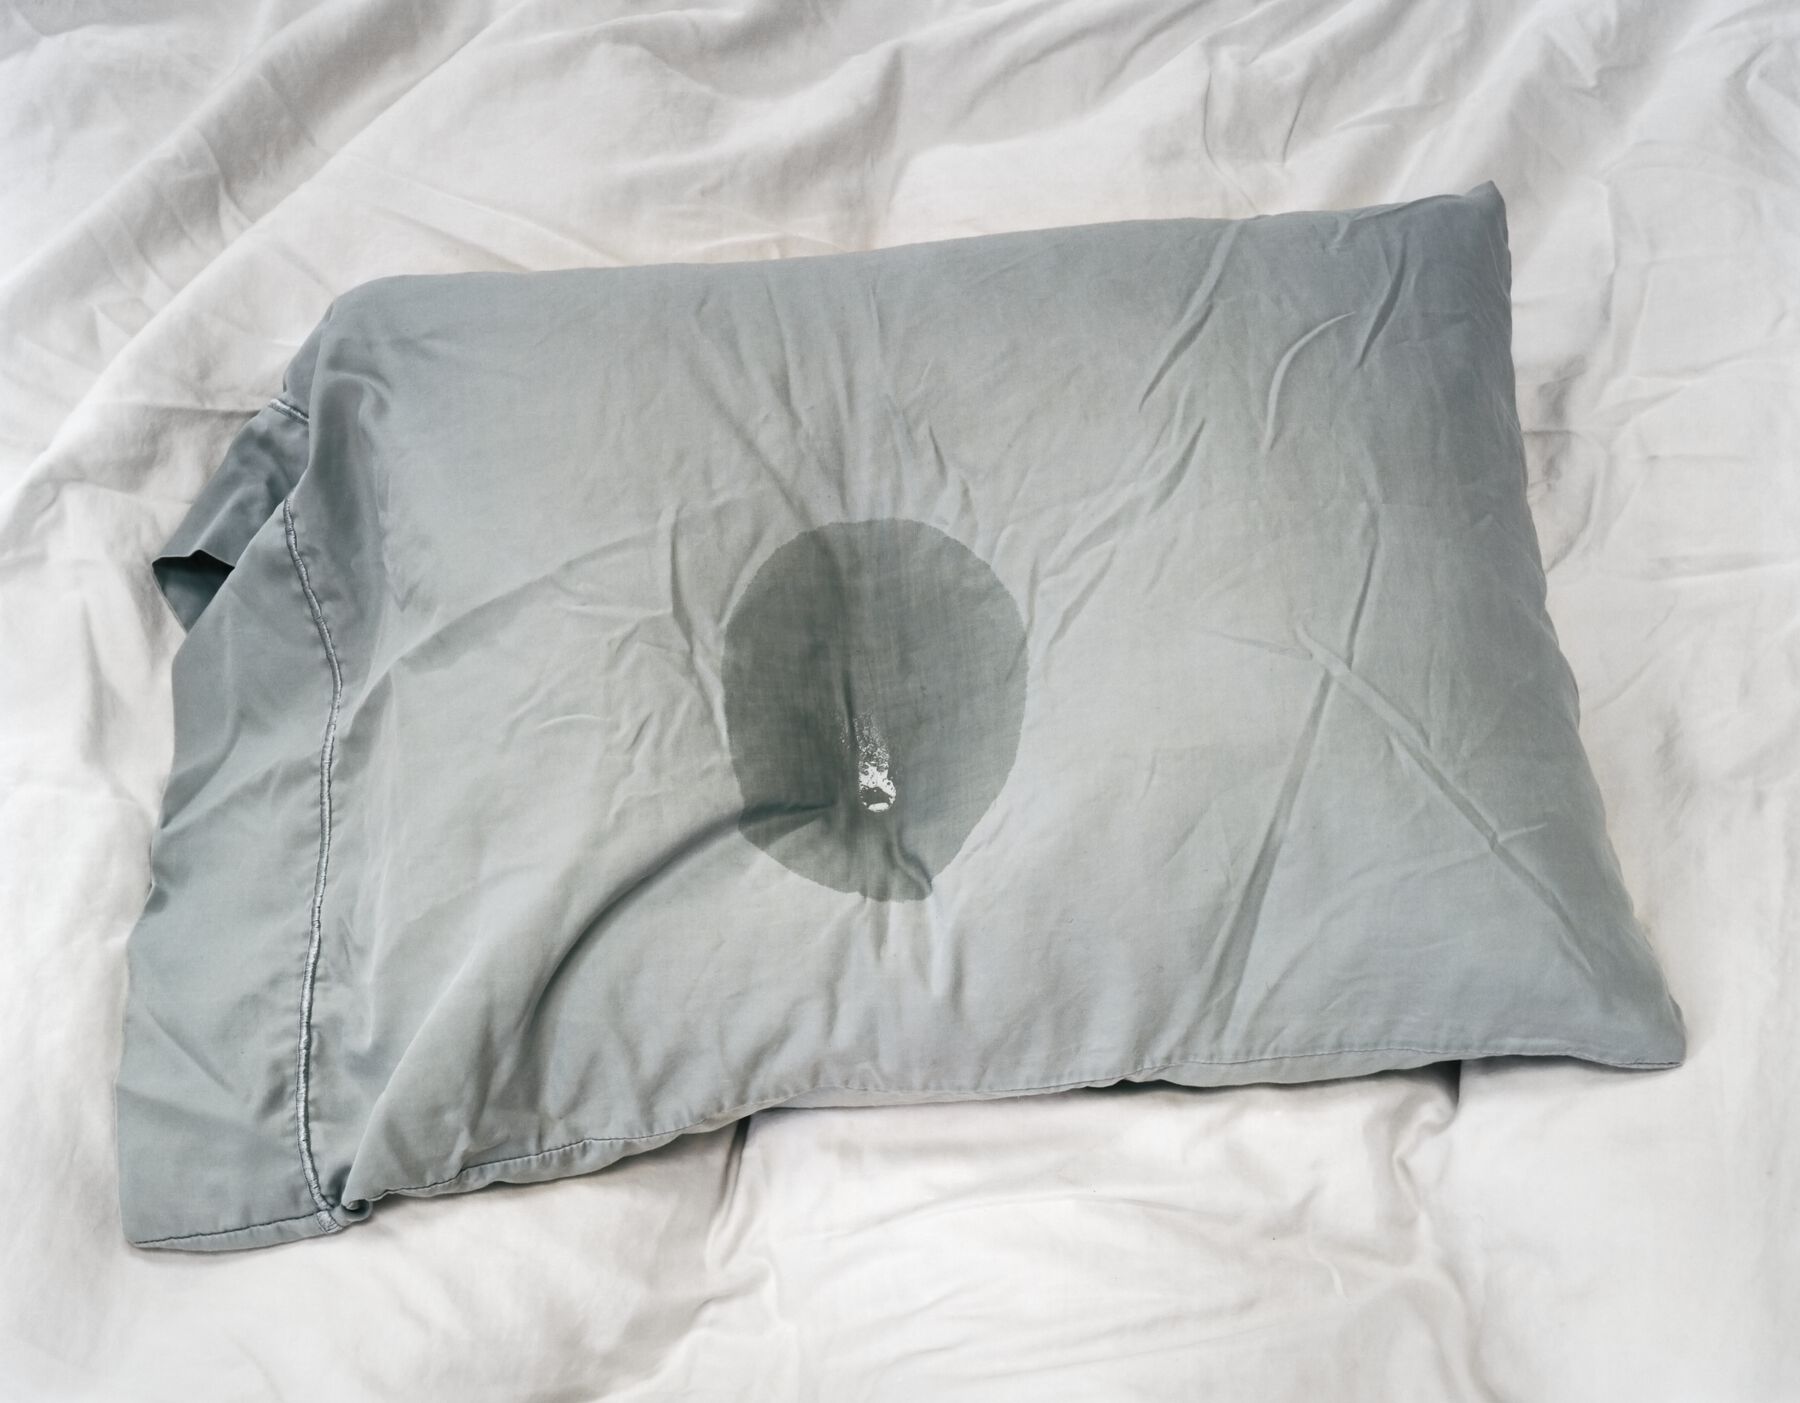 Rumpled blue-grey pillow with liquid stain (and transparent liquid pooled in center) on white bedsheet